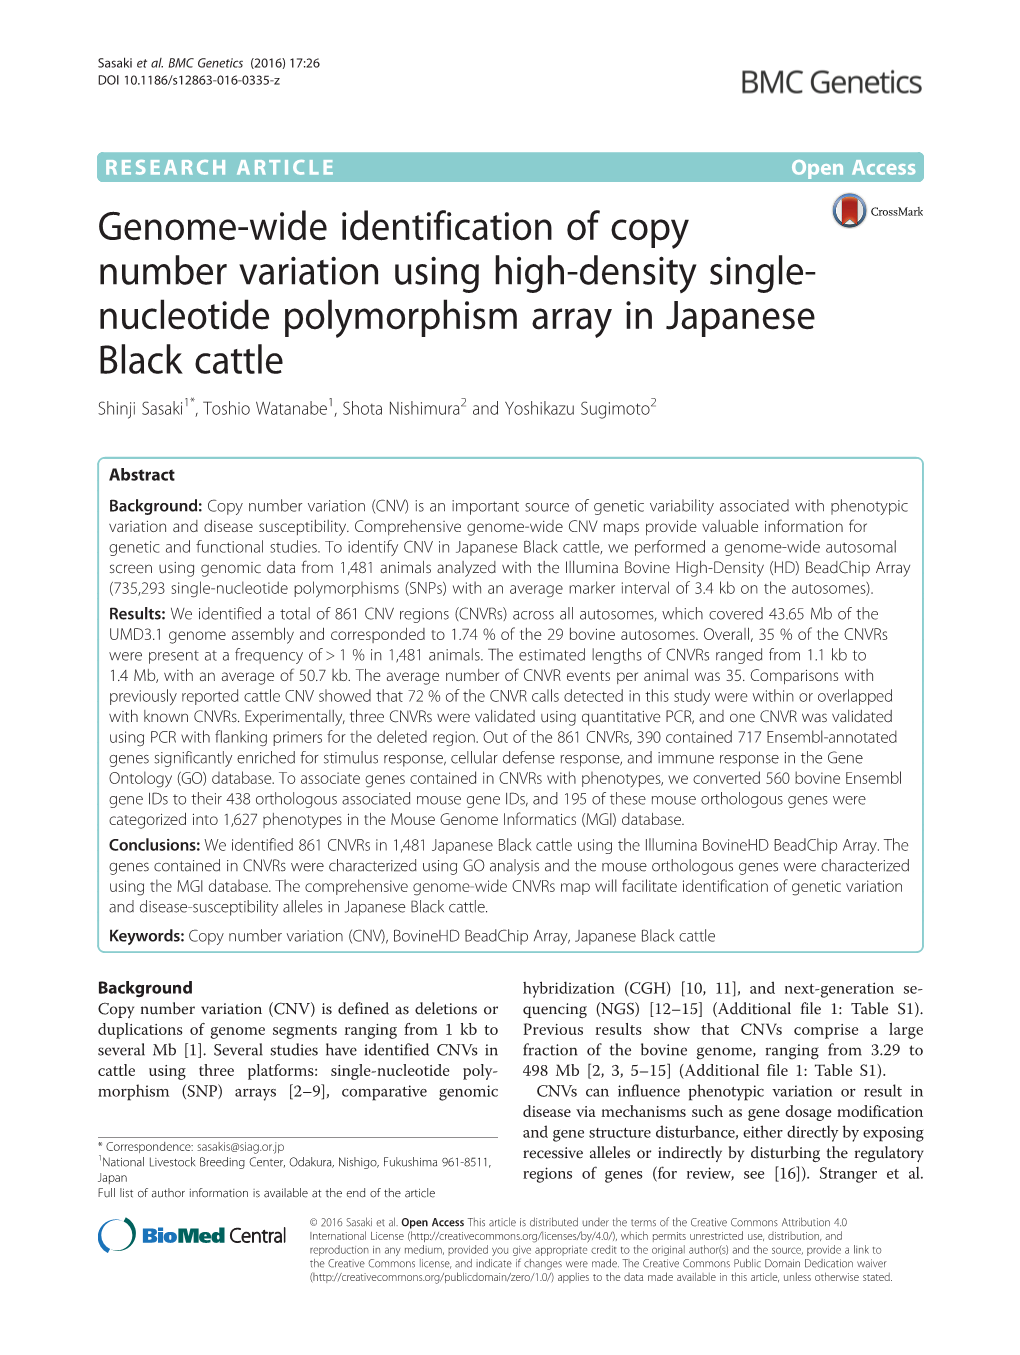 Genome-Wide Identification of Copy Number Variation Using High-Density